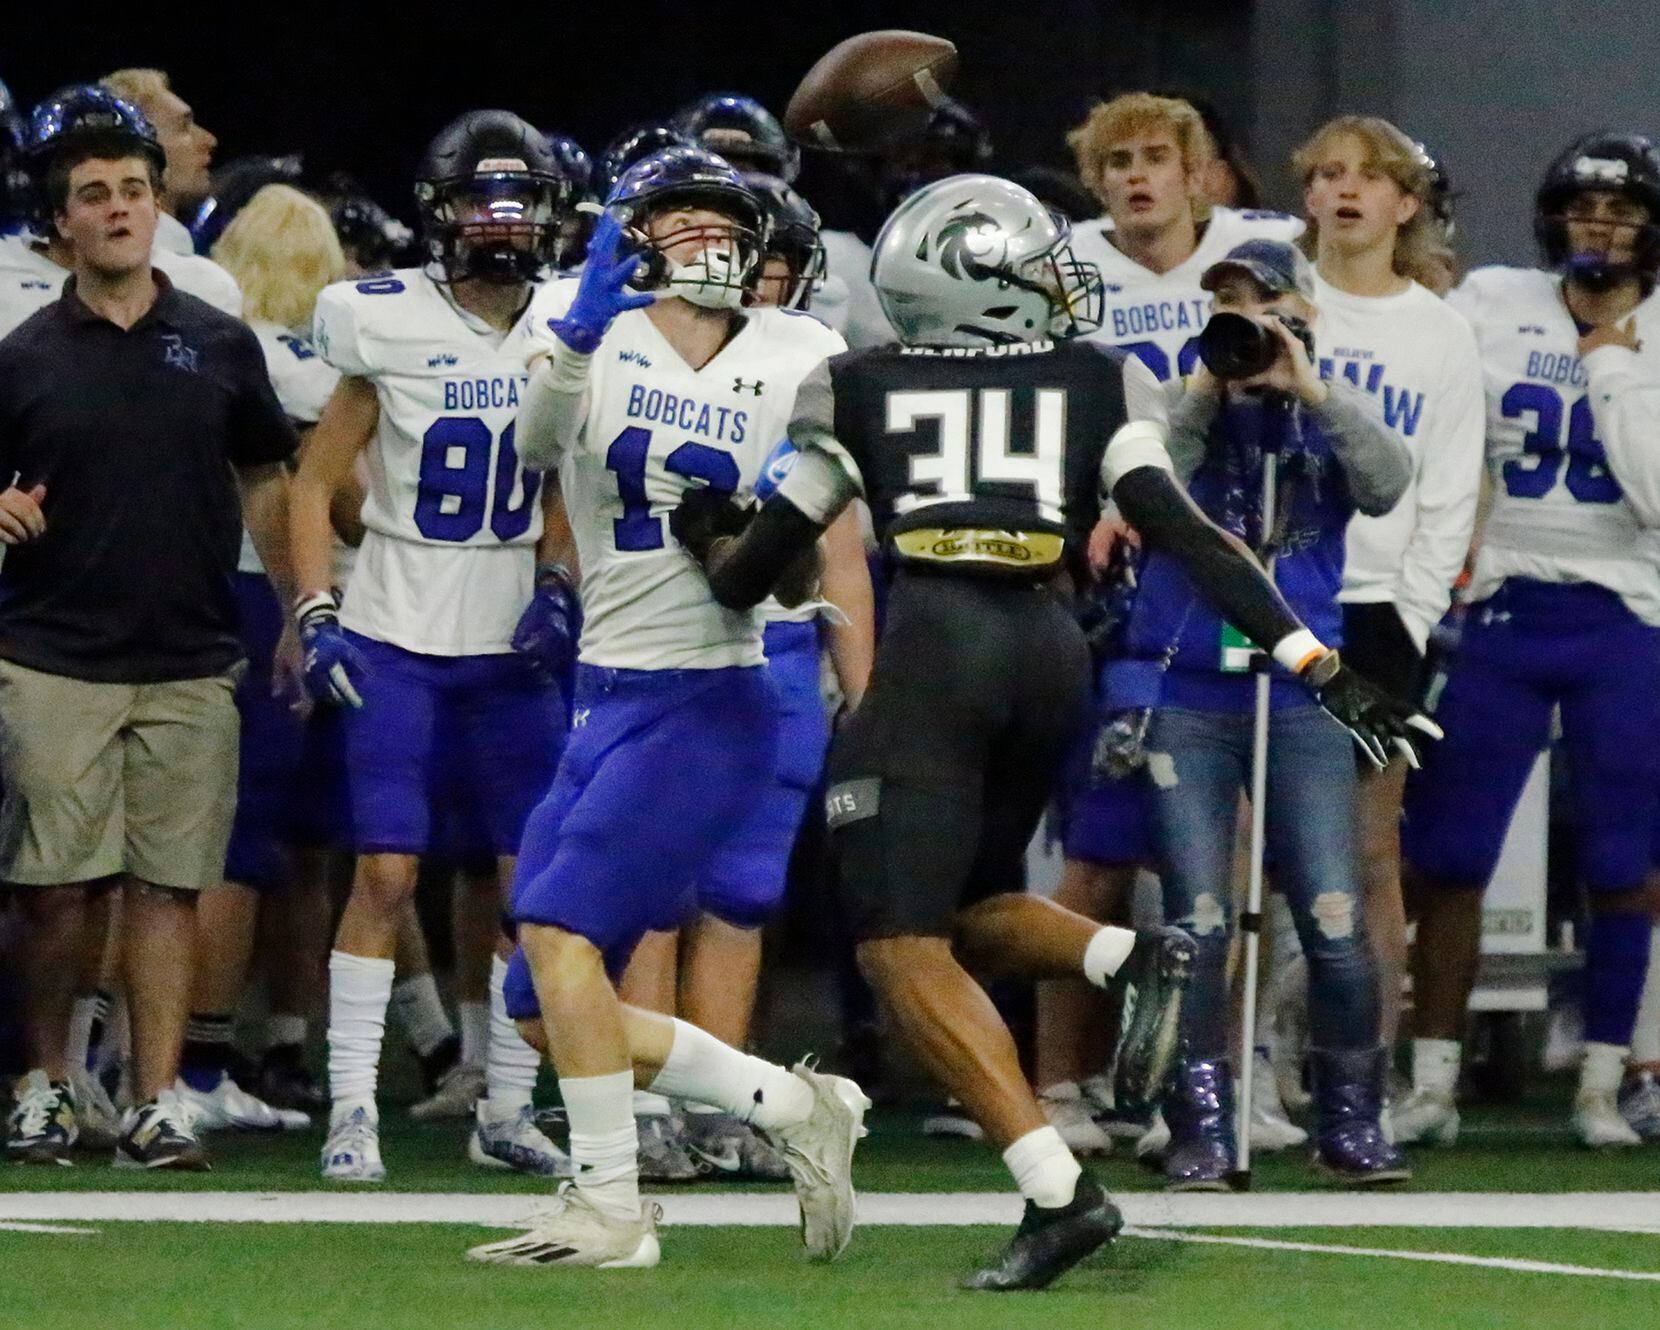 Byron Nelson High School wide receiver Gavin Mccurley (13) makes a catch over Guyer High School defensive back Anthony Benford (34) during the first half as Denton Guyer High School played Trophy Club Byron Nelson High School in a Class 6A Division II Region I semifinal football game at The Ford Center in Frisco on Saturday, November 27, 2021. (Stewart F. House/Special Contributor)